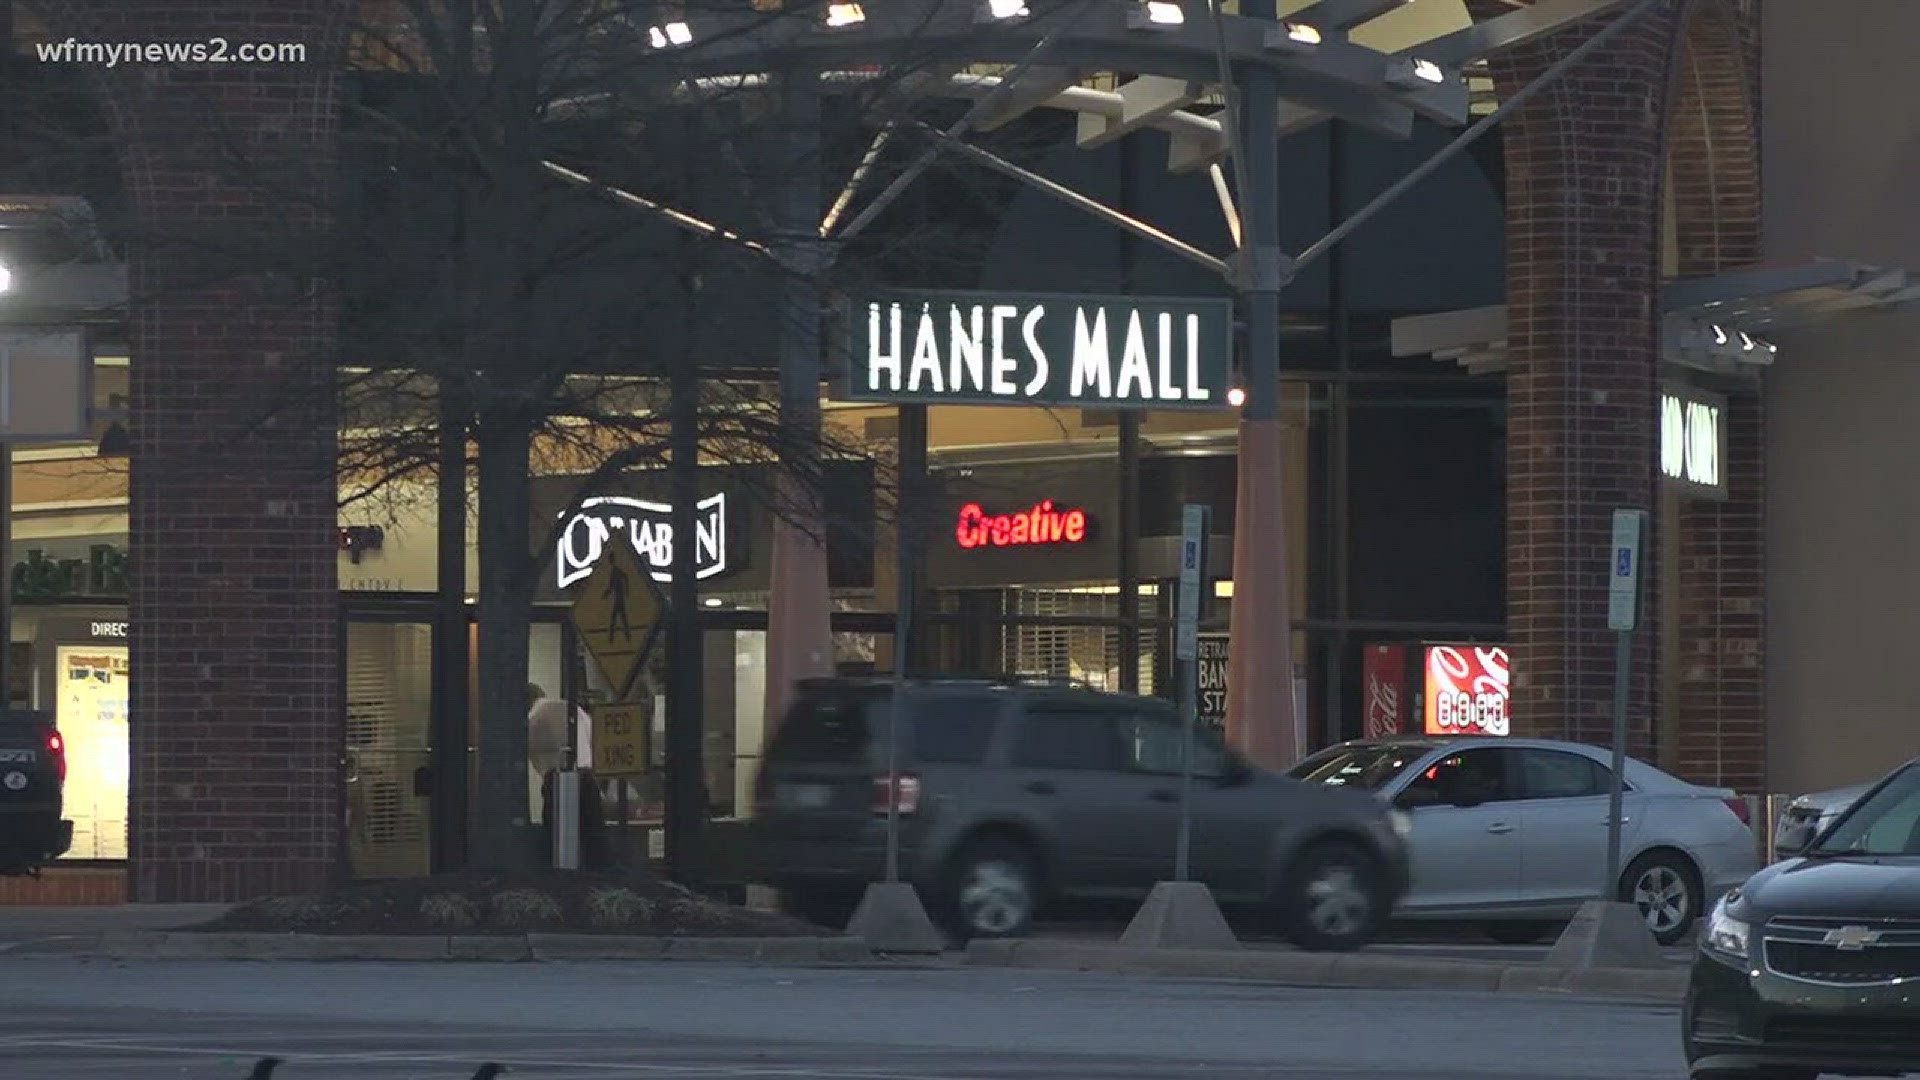 Now anyone under the age of 18 visiting Hanes Mall on Friday and Saturday will be required to have an adult or legal guardian with them after 5 p.m.